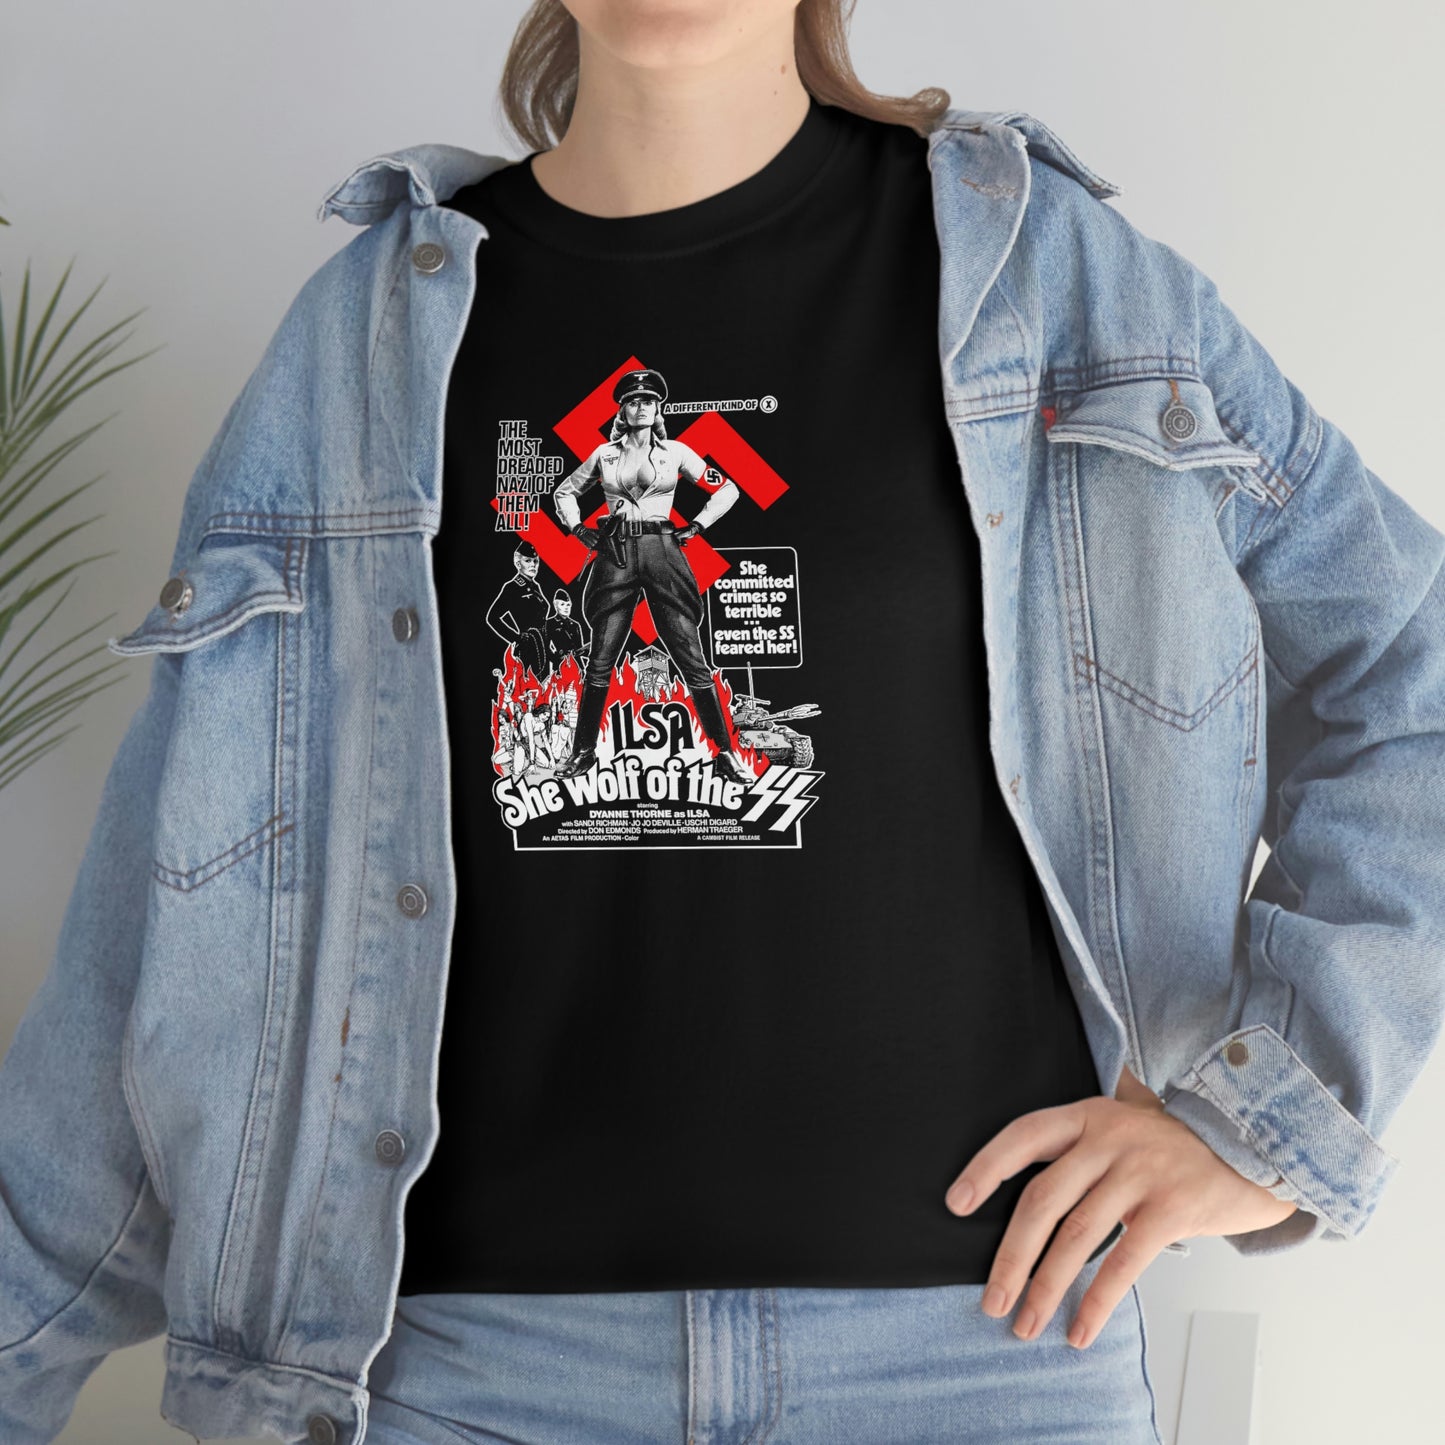 Ilsa, She-wolf of the SS T-Shirt